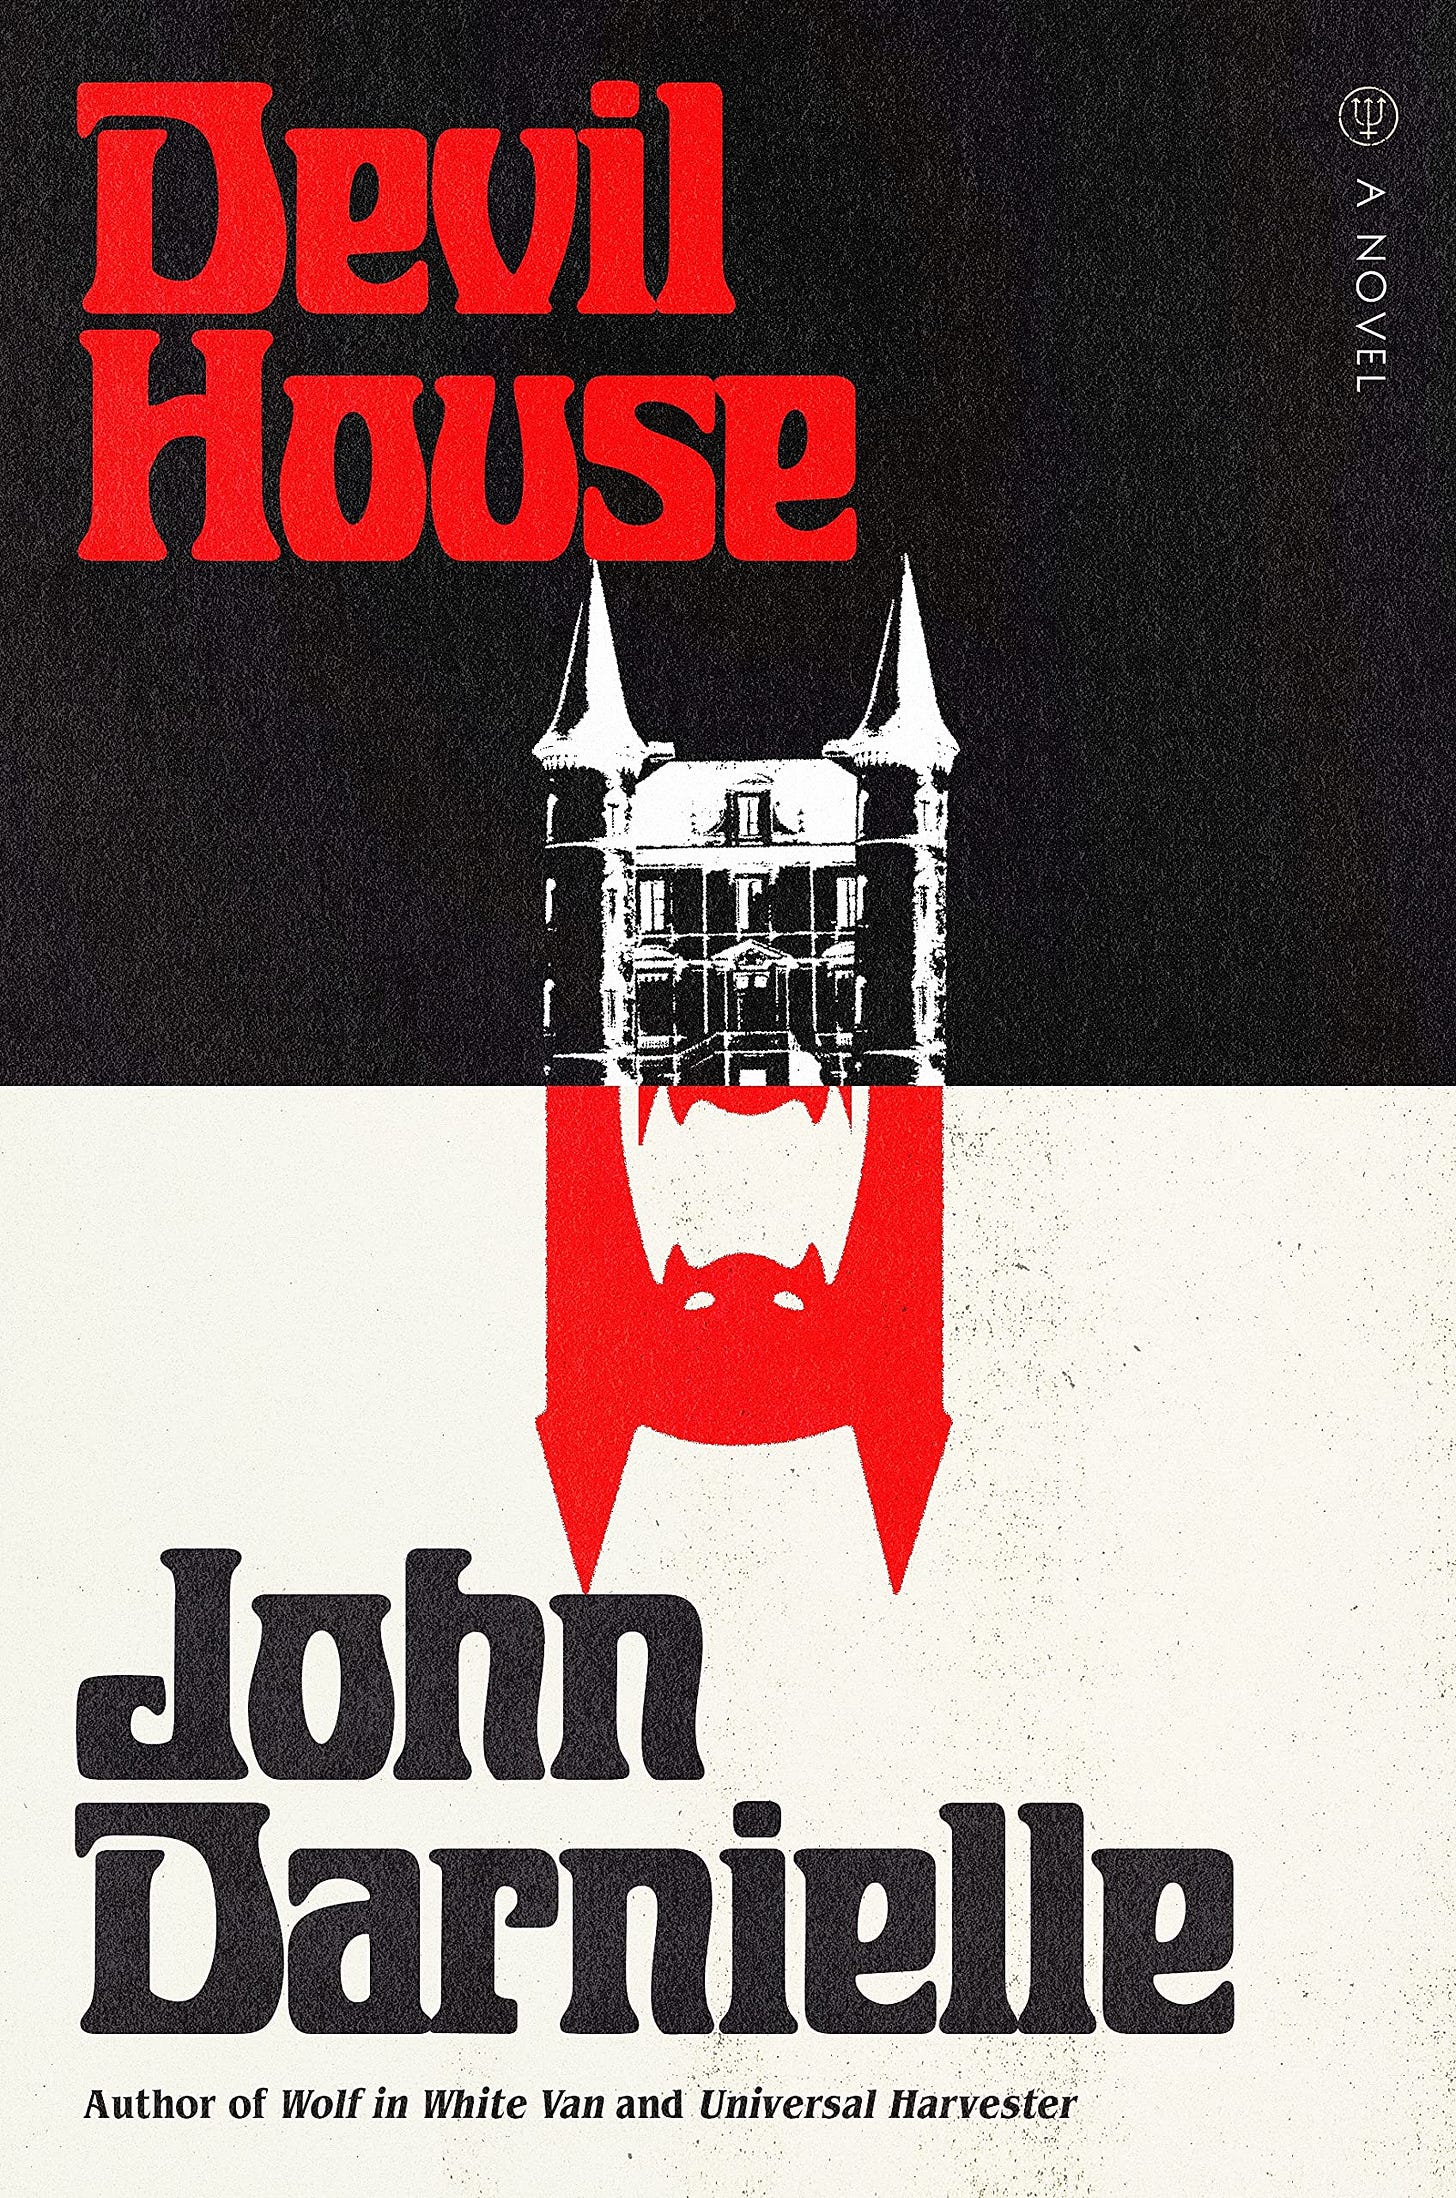 Cover of the book. "Devil House" in red on black, a picture of a house with two turrets beneath in. The bottom half of the book has a white background with a mirror image of the house made to look like a stylized devil's face with two horns. "John Darnielle Author of Wolf in White Van and Universal Harvester," in black on white at the bottom.